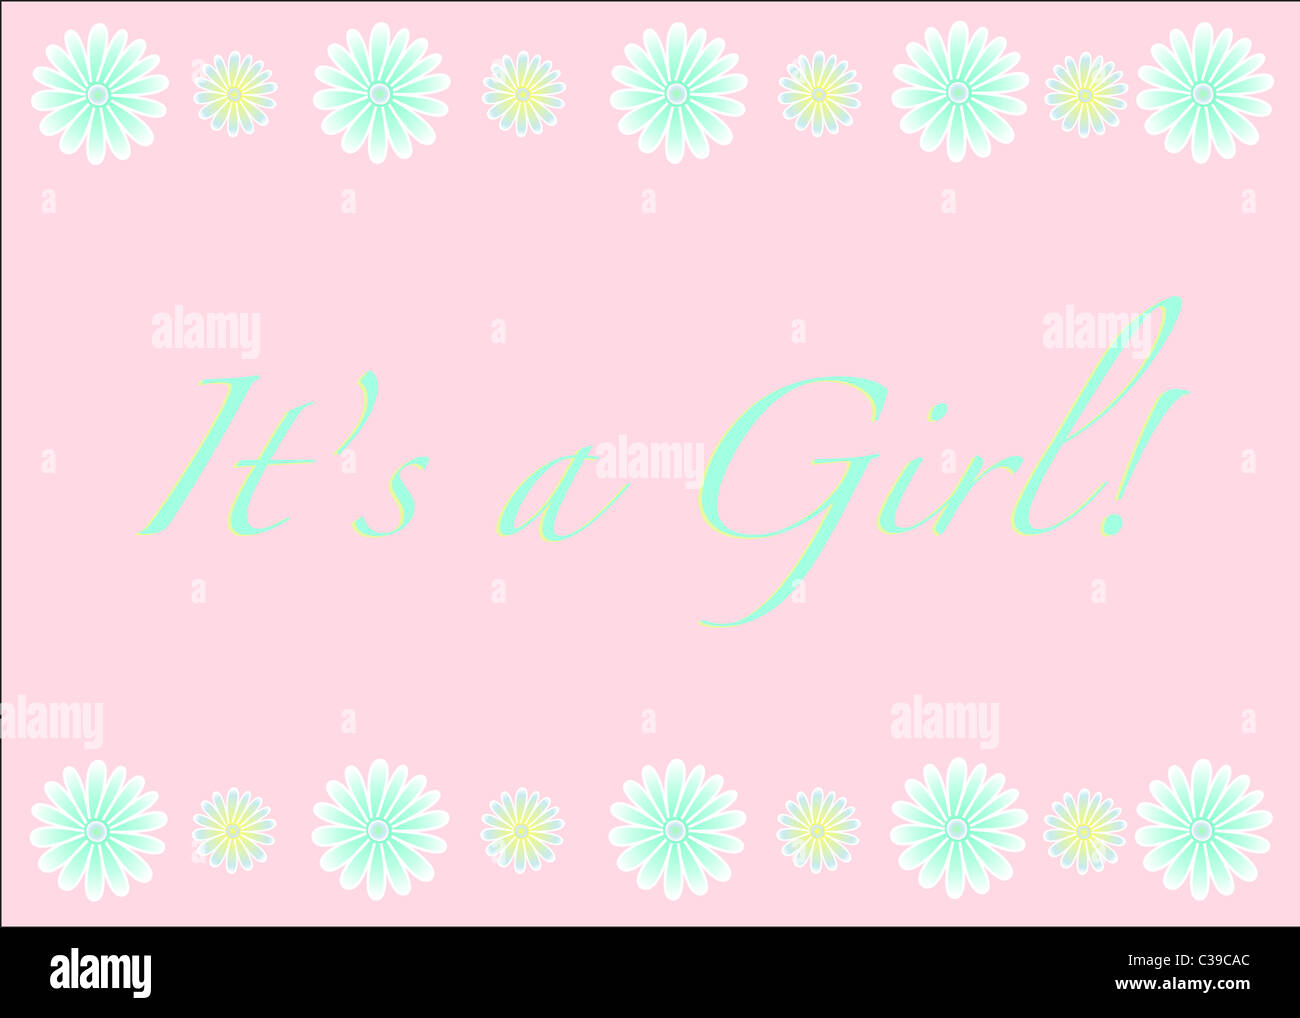 It's a Girl greeting card illustration design Stock Photo